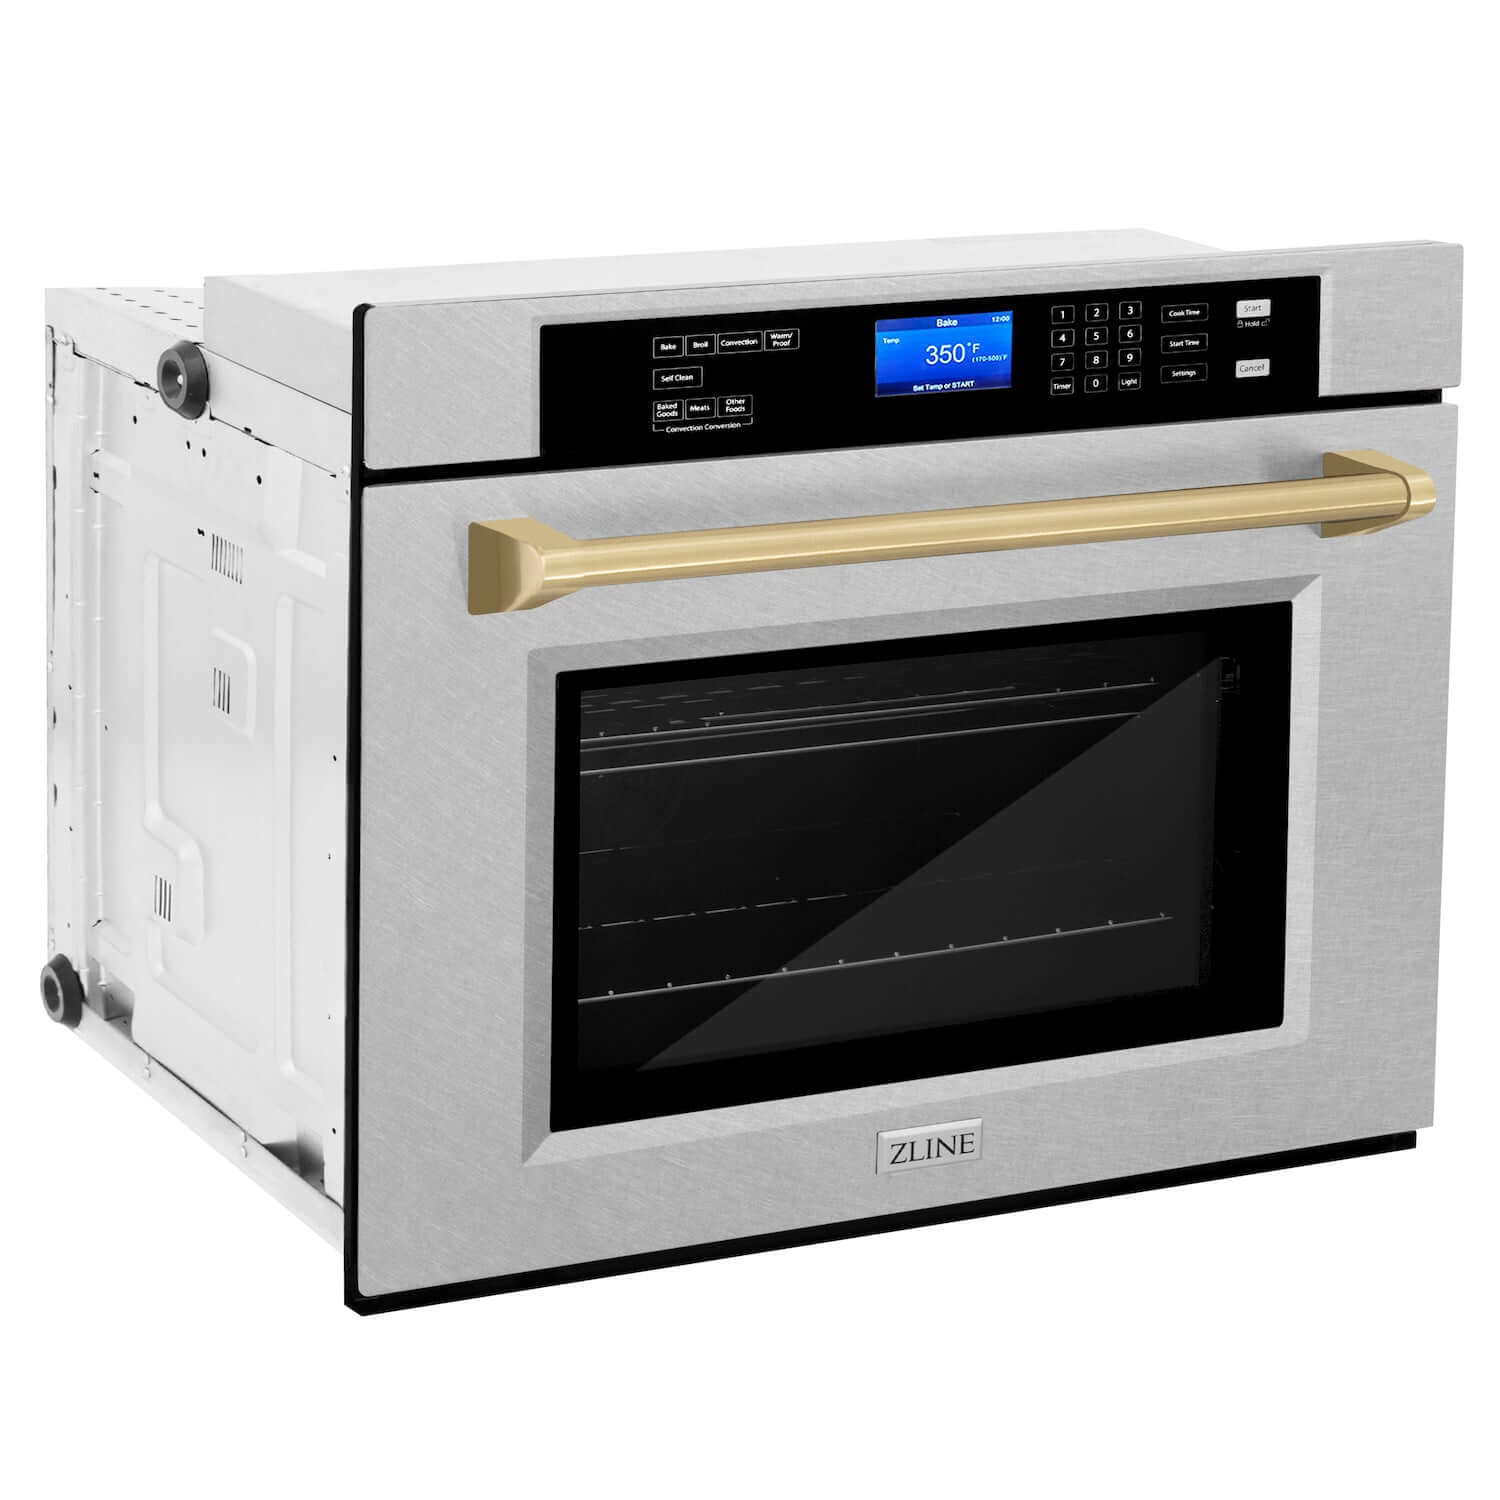 ZLINE Autograph Edition 30 in. Electric Single Wall Oven with Self Clean and True Convection in Fingerprint Resistant Stainless Steel and Champagne Bronze Accents (AWSSZ-30-CB) side, closed.